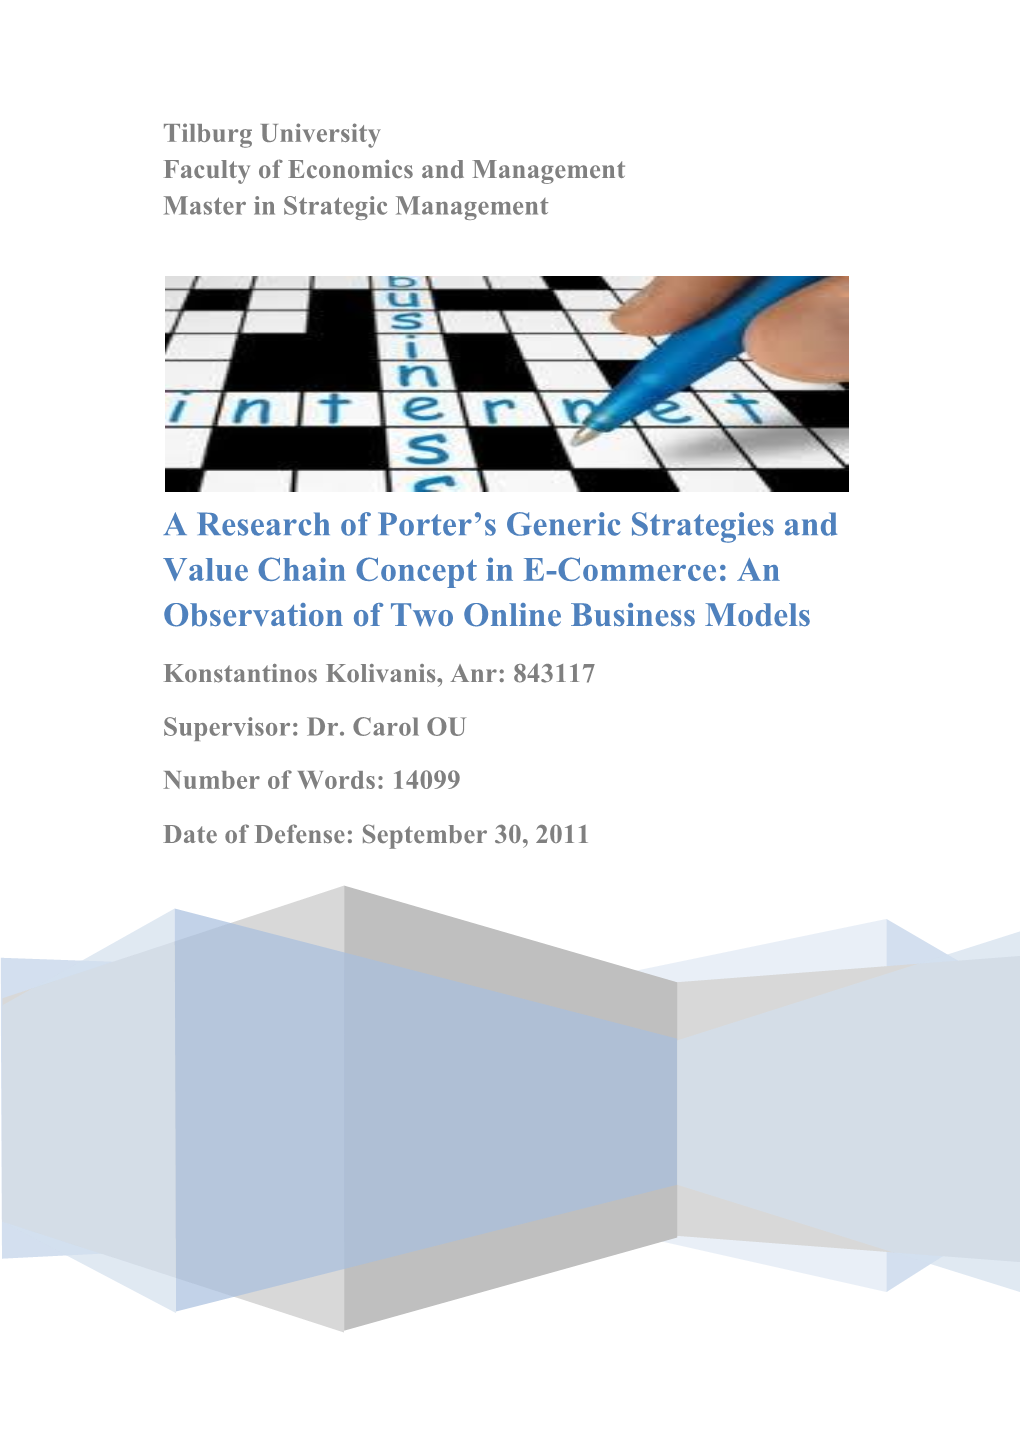 A Research of Porter's Generic Strategies and Value Chain